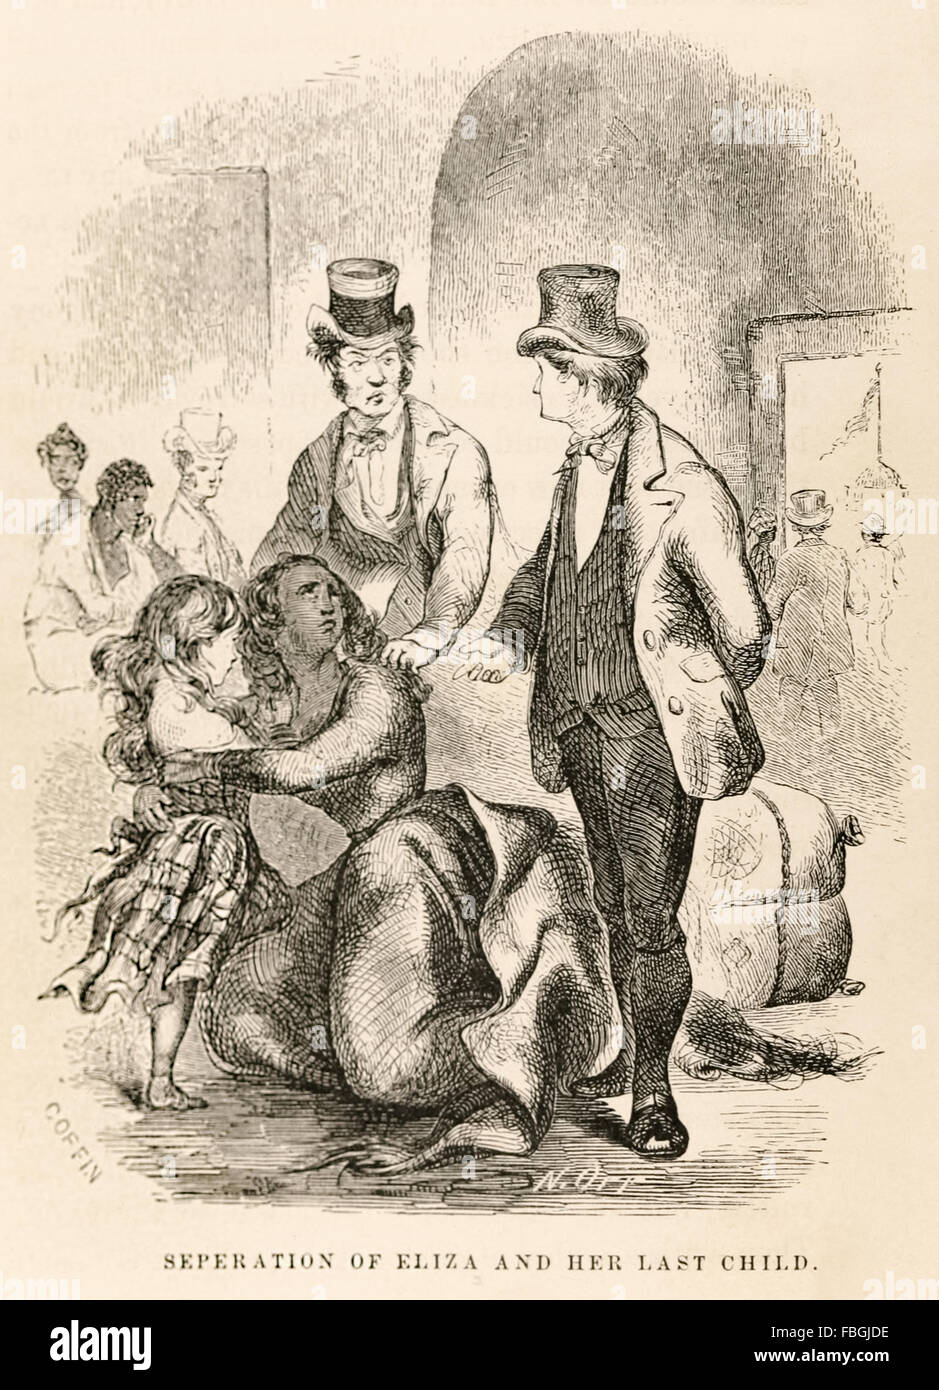 'Seperation of Eliza and her last child' from 'Twelve Years a Slave or Solomon Northup, a citizen of New York' published in 1853. The book recounts the author's experience as a free-born African American from New York being kidnapped and sold as a slave and forced to work 12 years on a cotton plantation in Louisiana. He managed to get word to family through a Canadian staying on the plantation and regained his freedom. He went on to became active in the abolitionist movement. See description for more information. Stock Photo